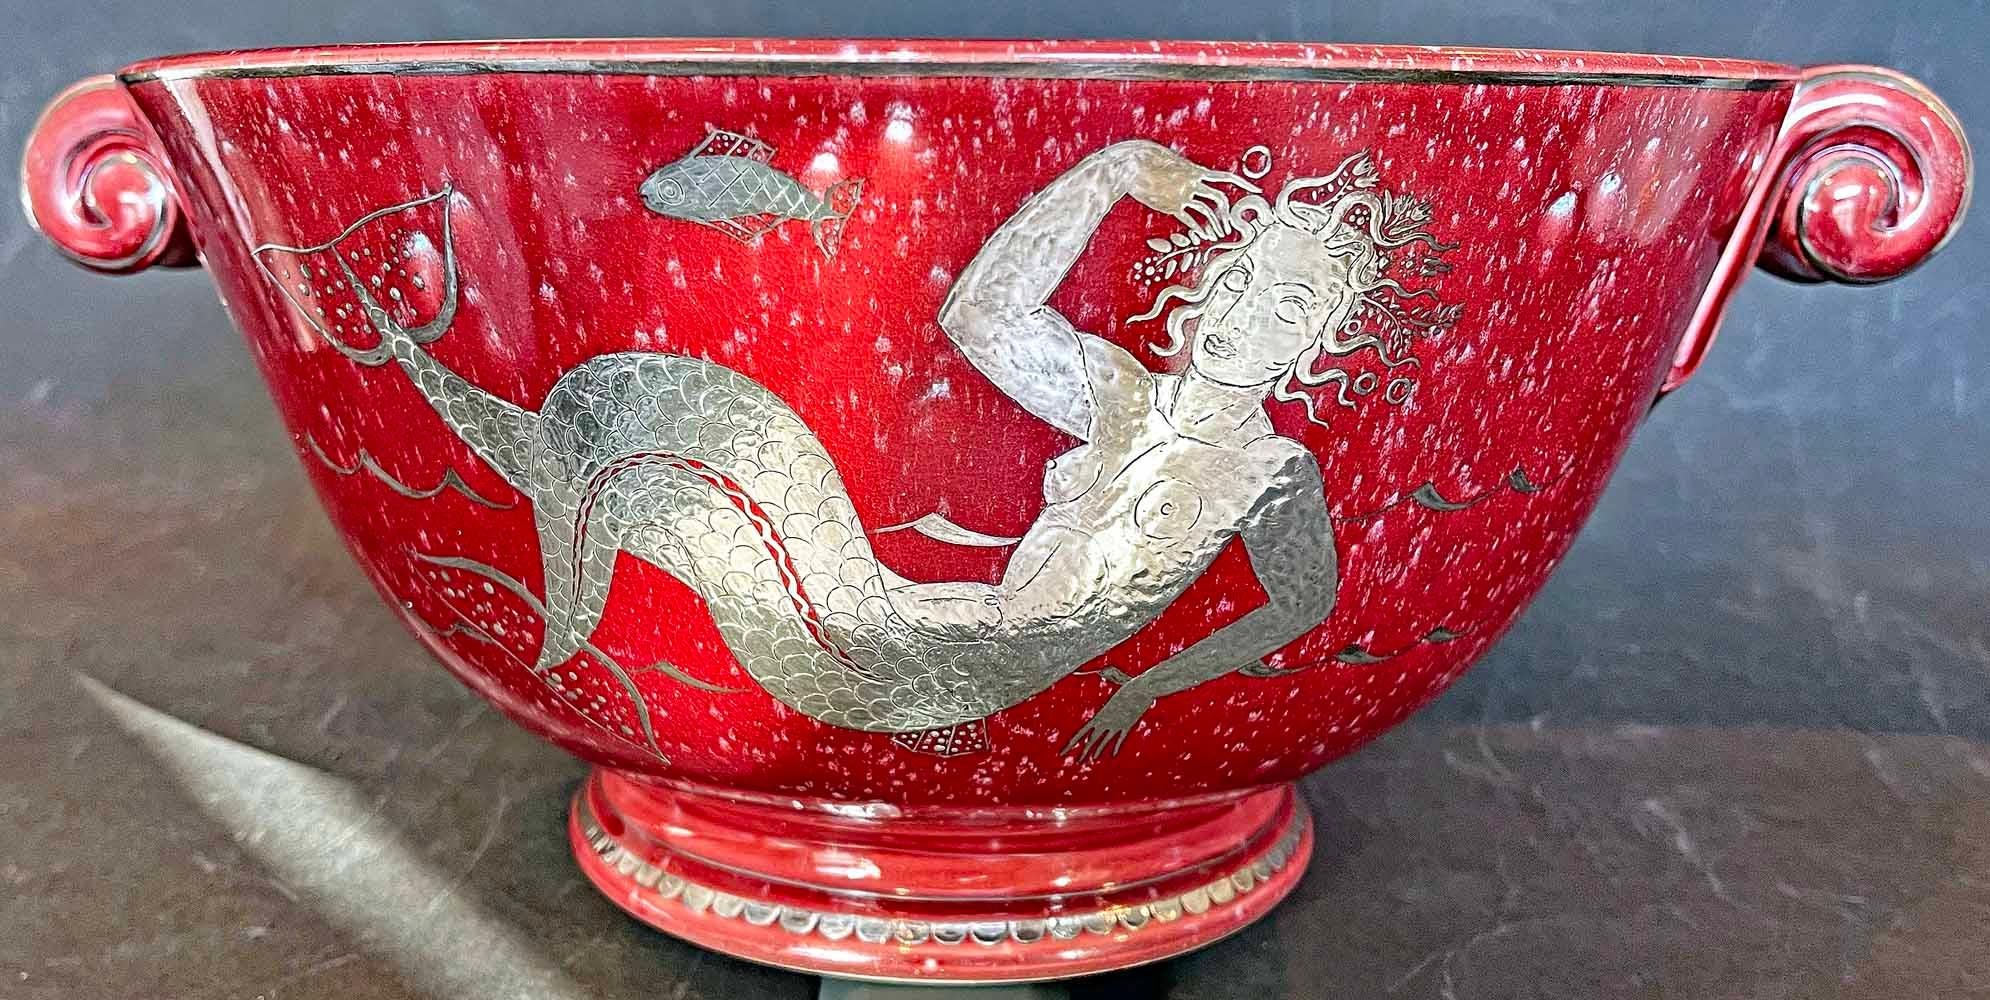 Rare and richly finished in a deep red glaze with tooled silver overlay, this exceedingly rare bowl produced by the Gustavsberg porcelain works in Sweden features a mermaid and fish on its side, and a starfish circumnavigated by circles of stylized